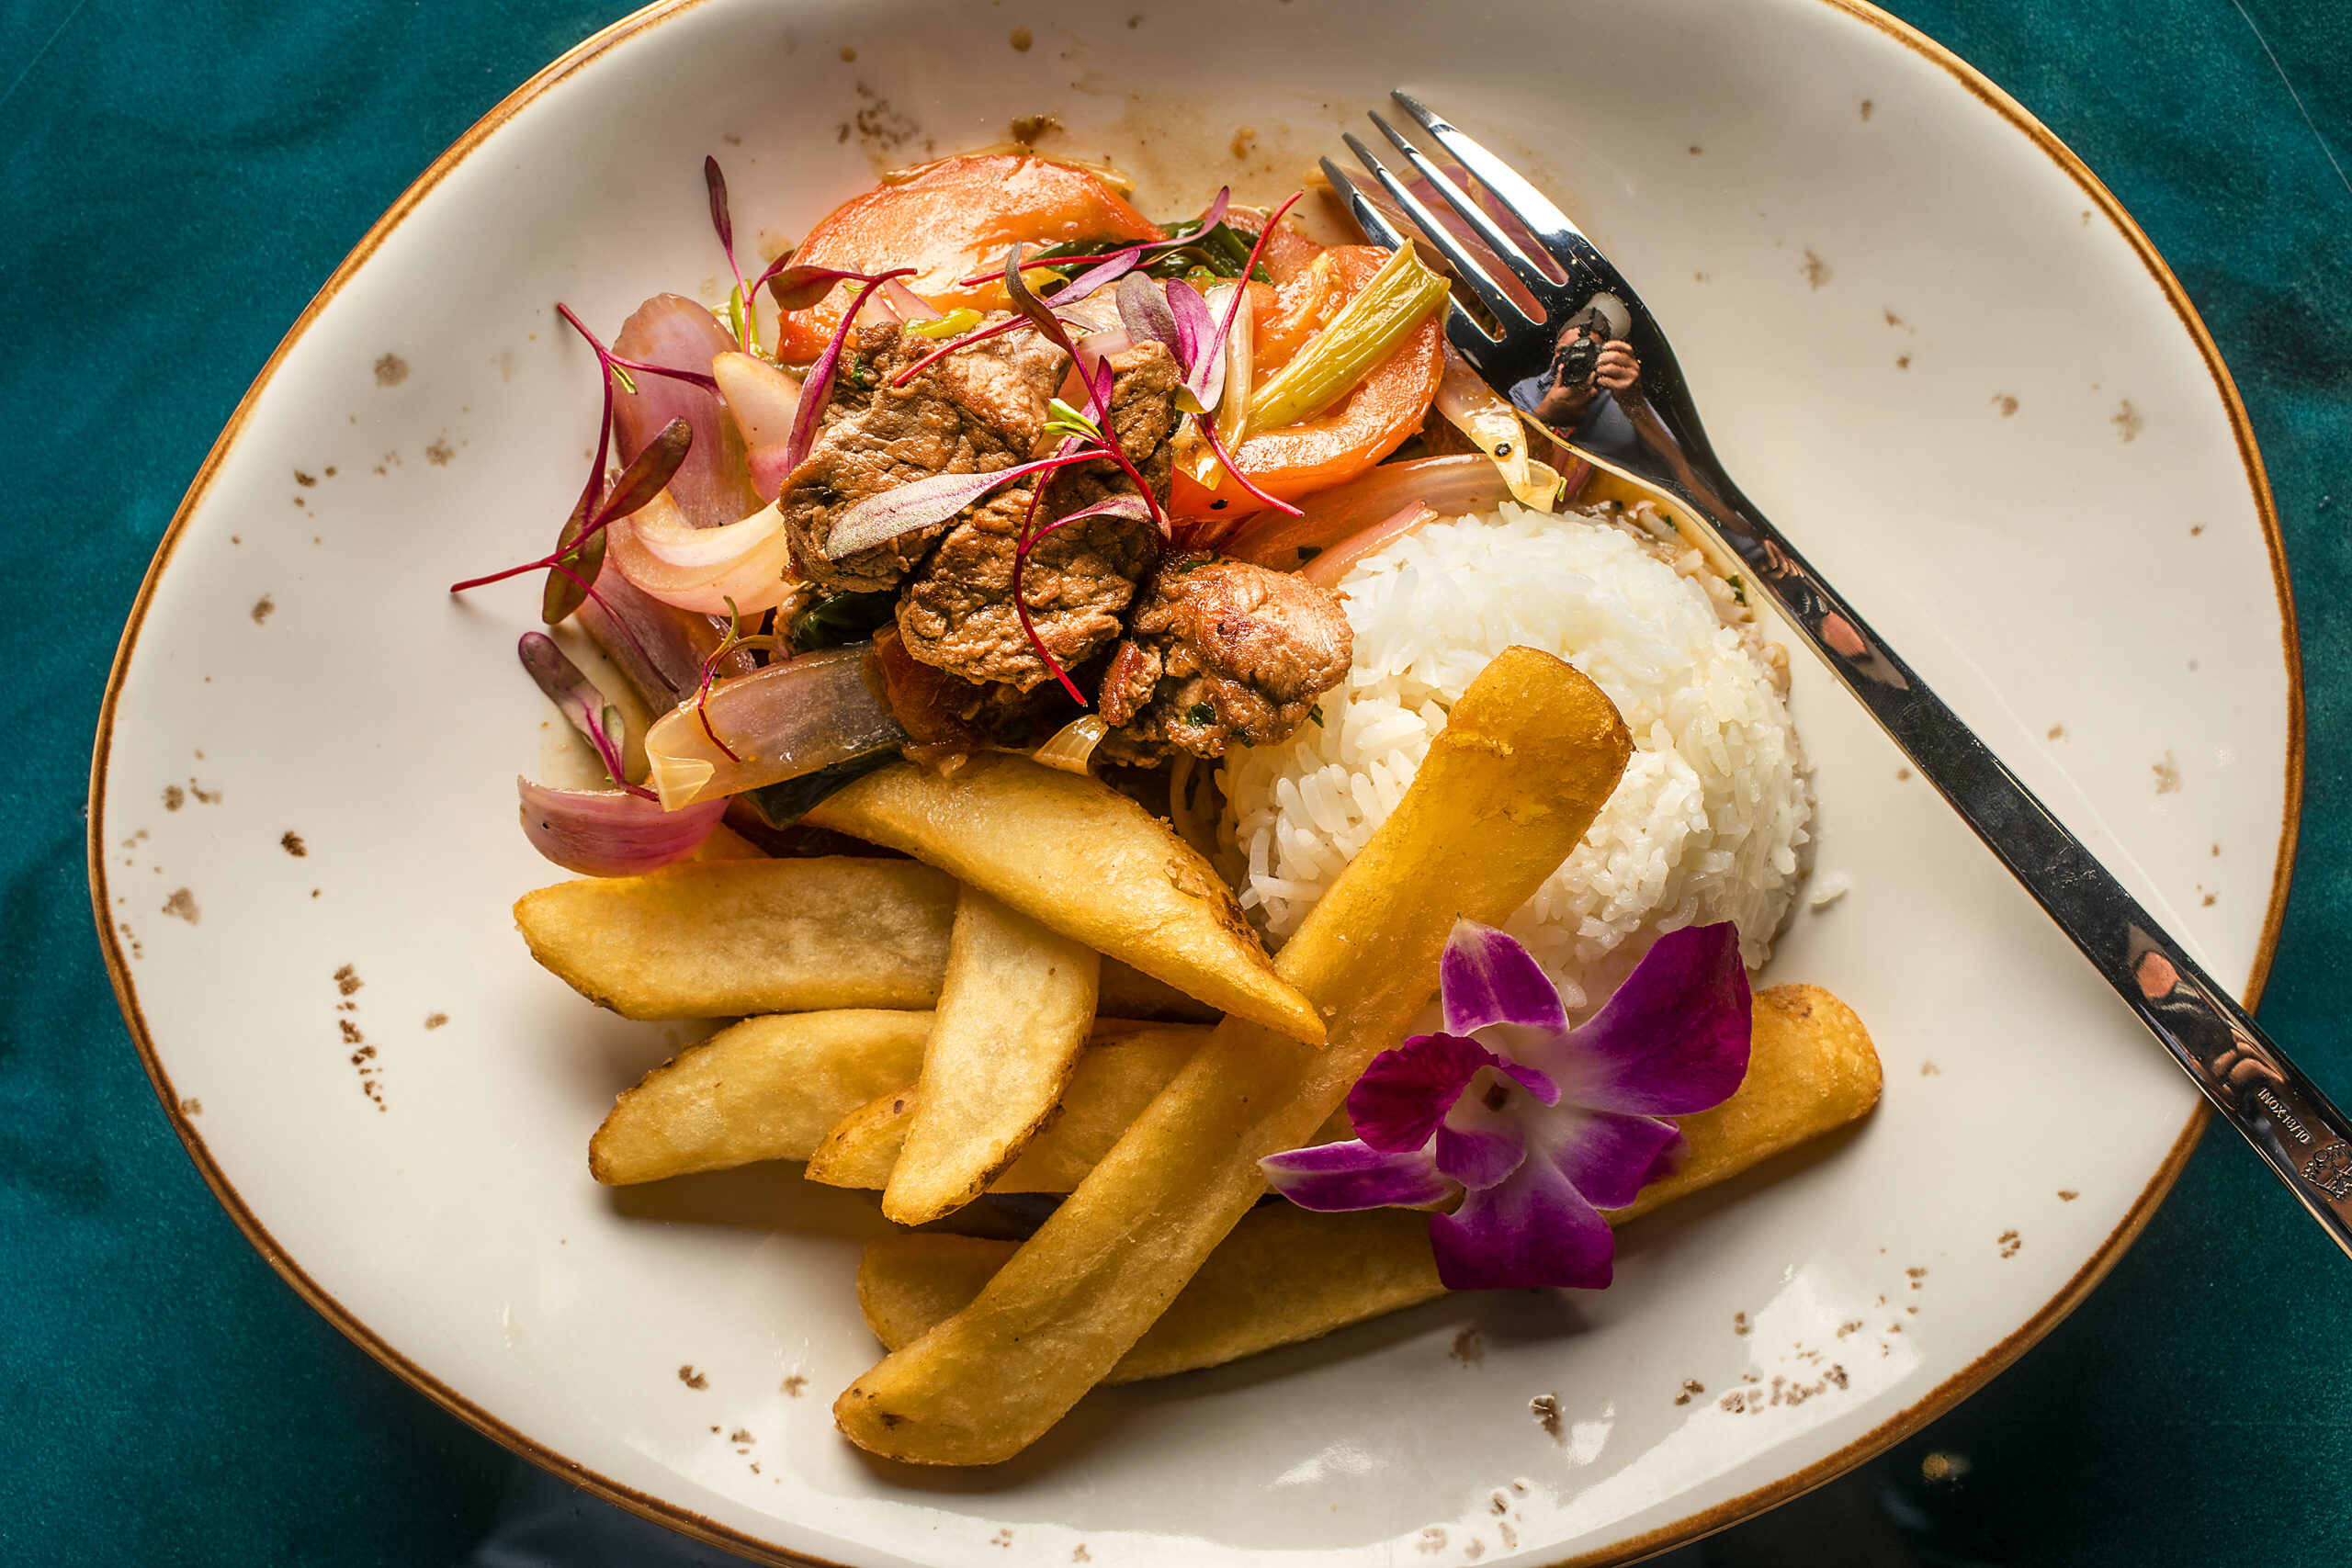 Lomo Saltado Clásico, traditional Peruvian style beef tenderloin with red onion, tomatoes, cilantro, garlic, soy and oyster sauce, french fries and rice, from Warike Restobar in downtown Santa Rosa. (John Burgess / The Press Democrat)